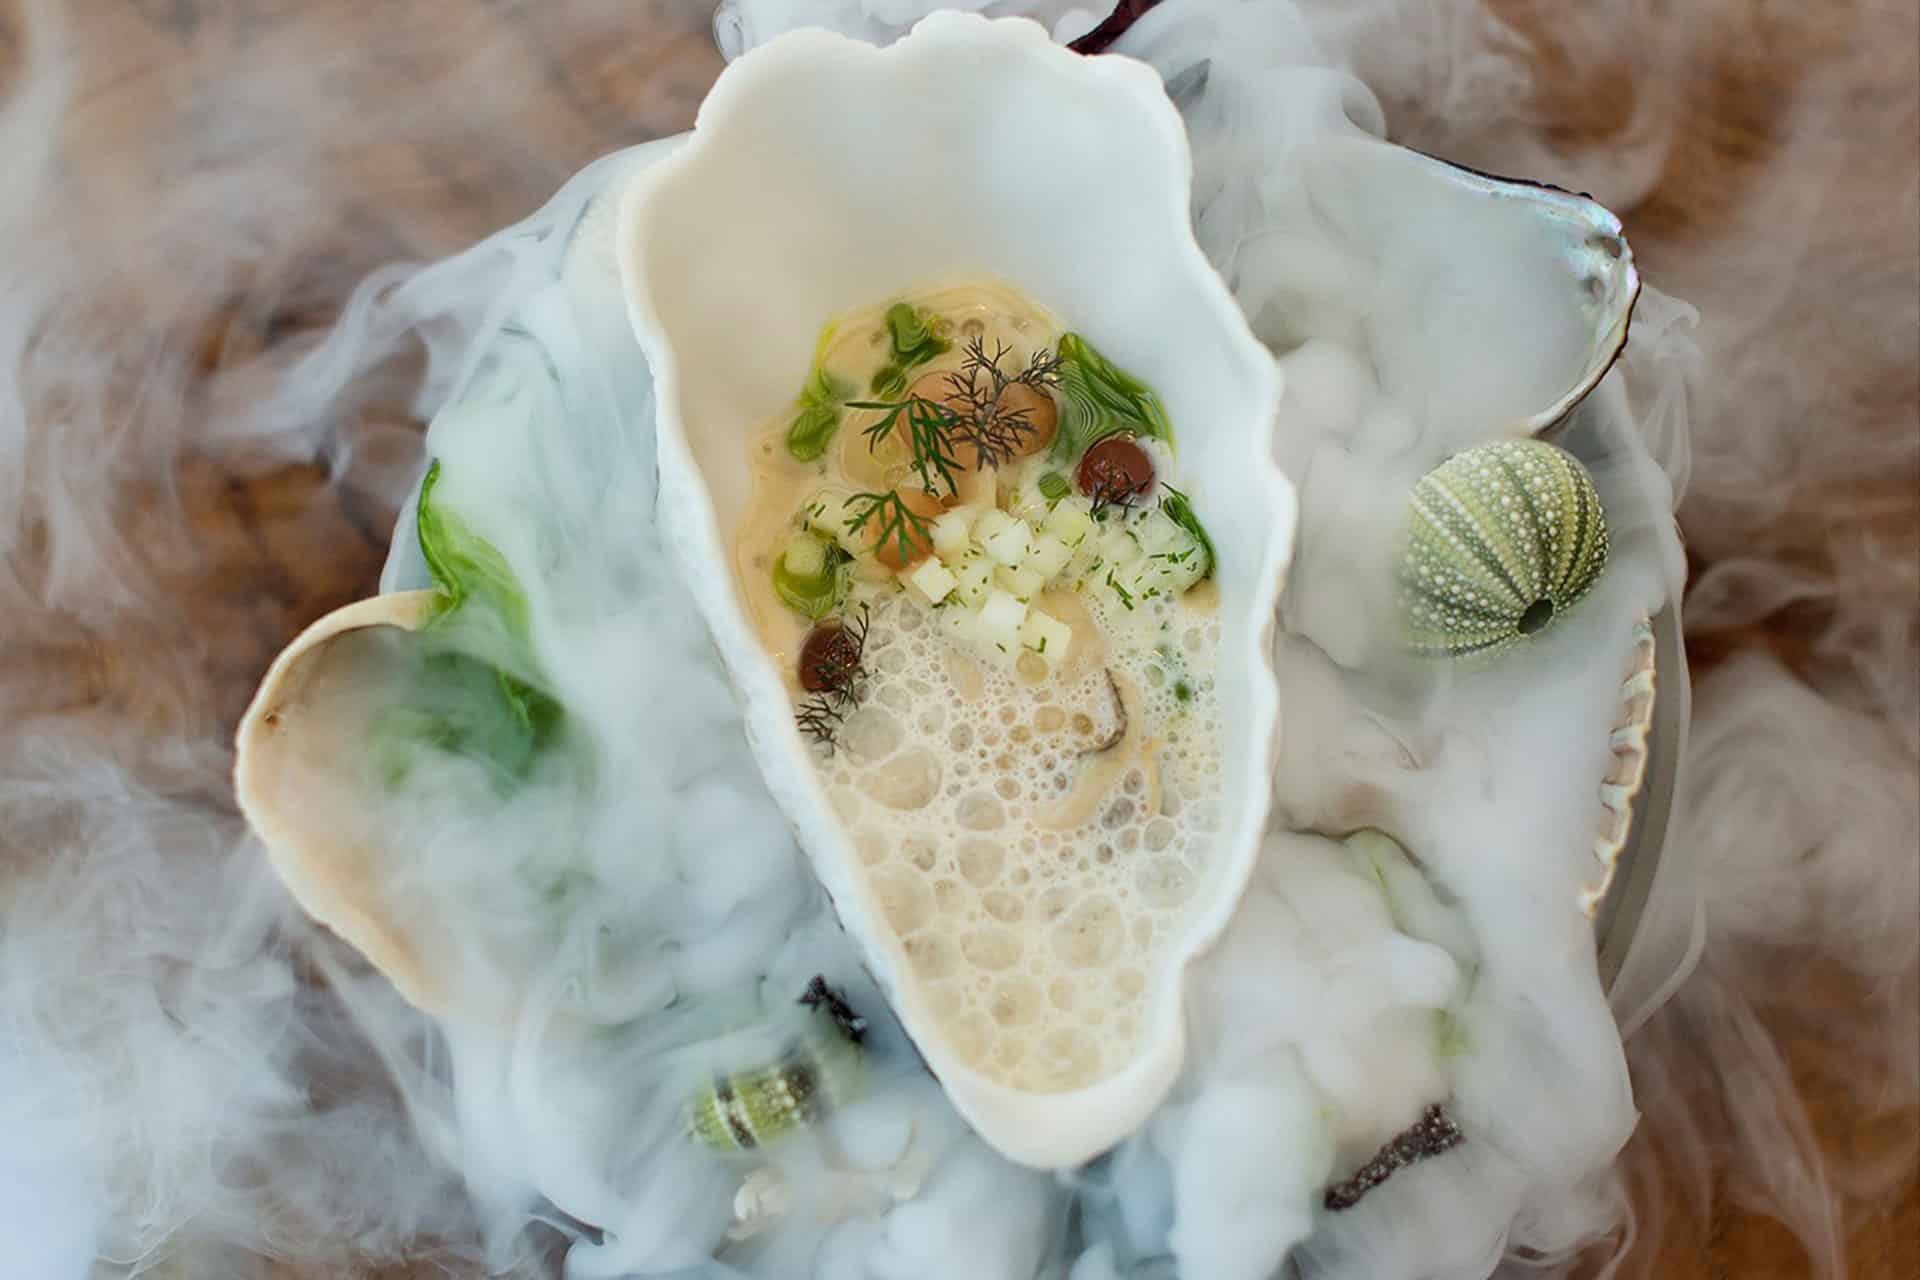 A contemporary plated seafood dish at PIER – one of the top 10 fine dining restaurants in Cape Town.